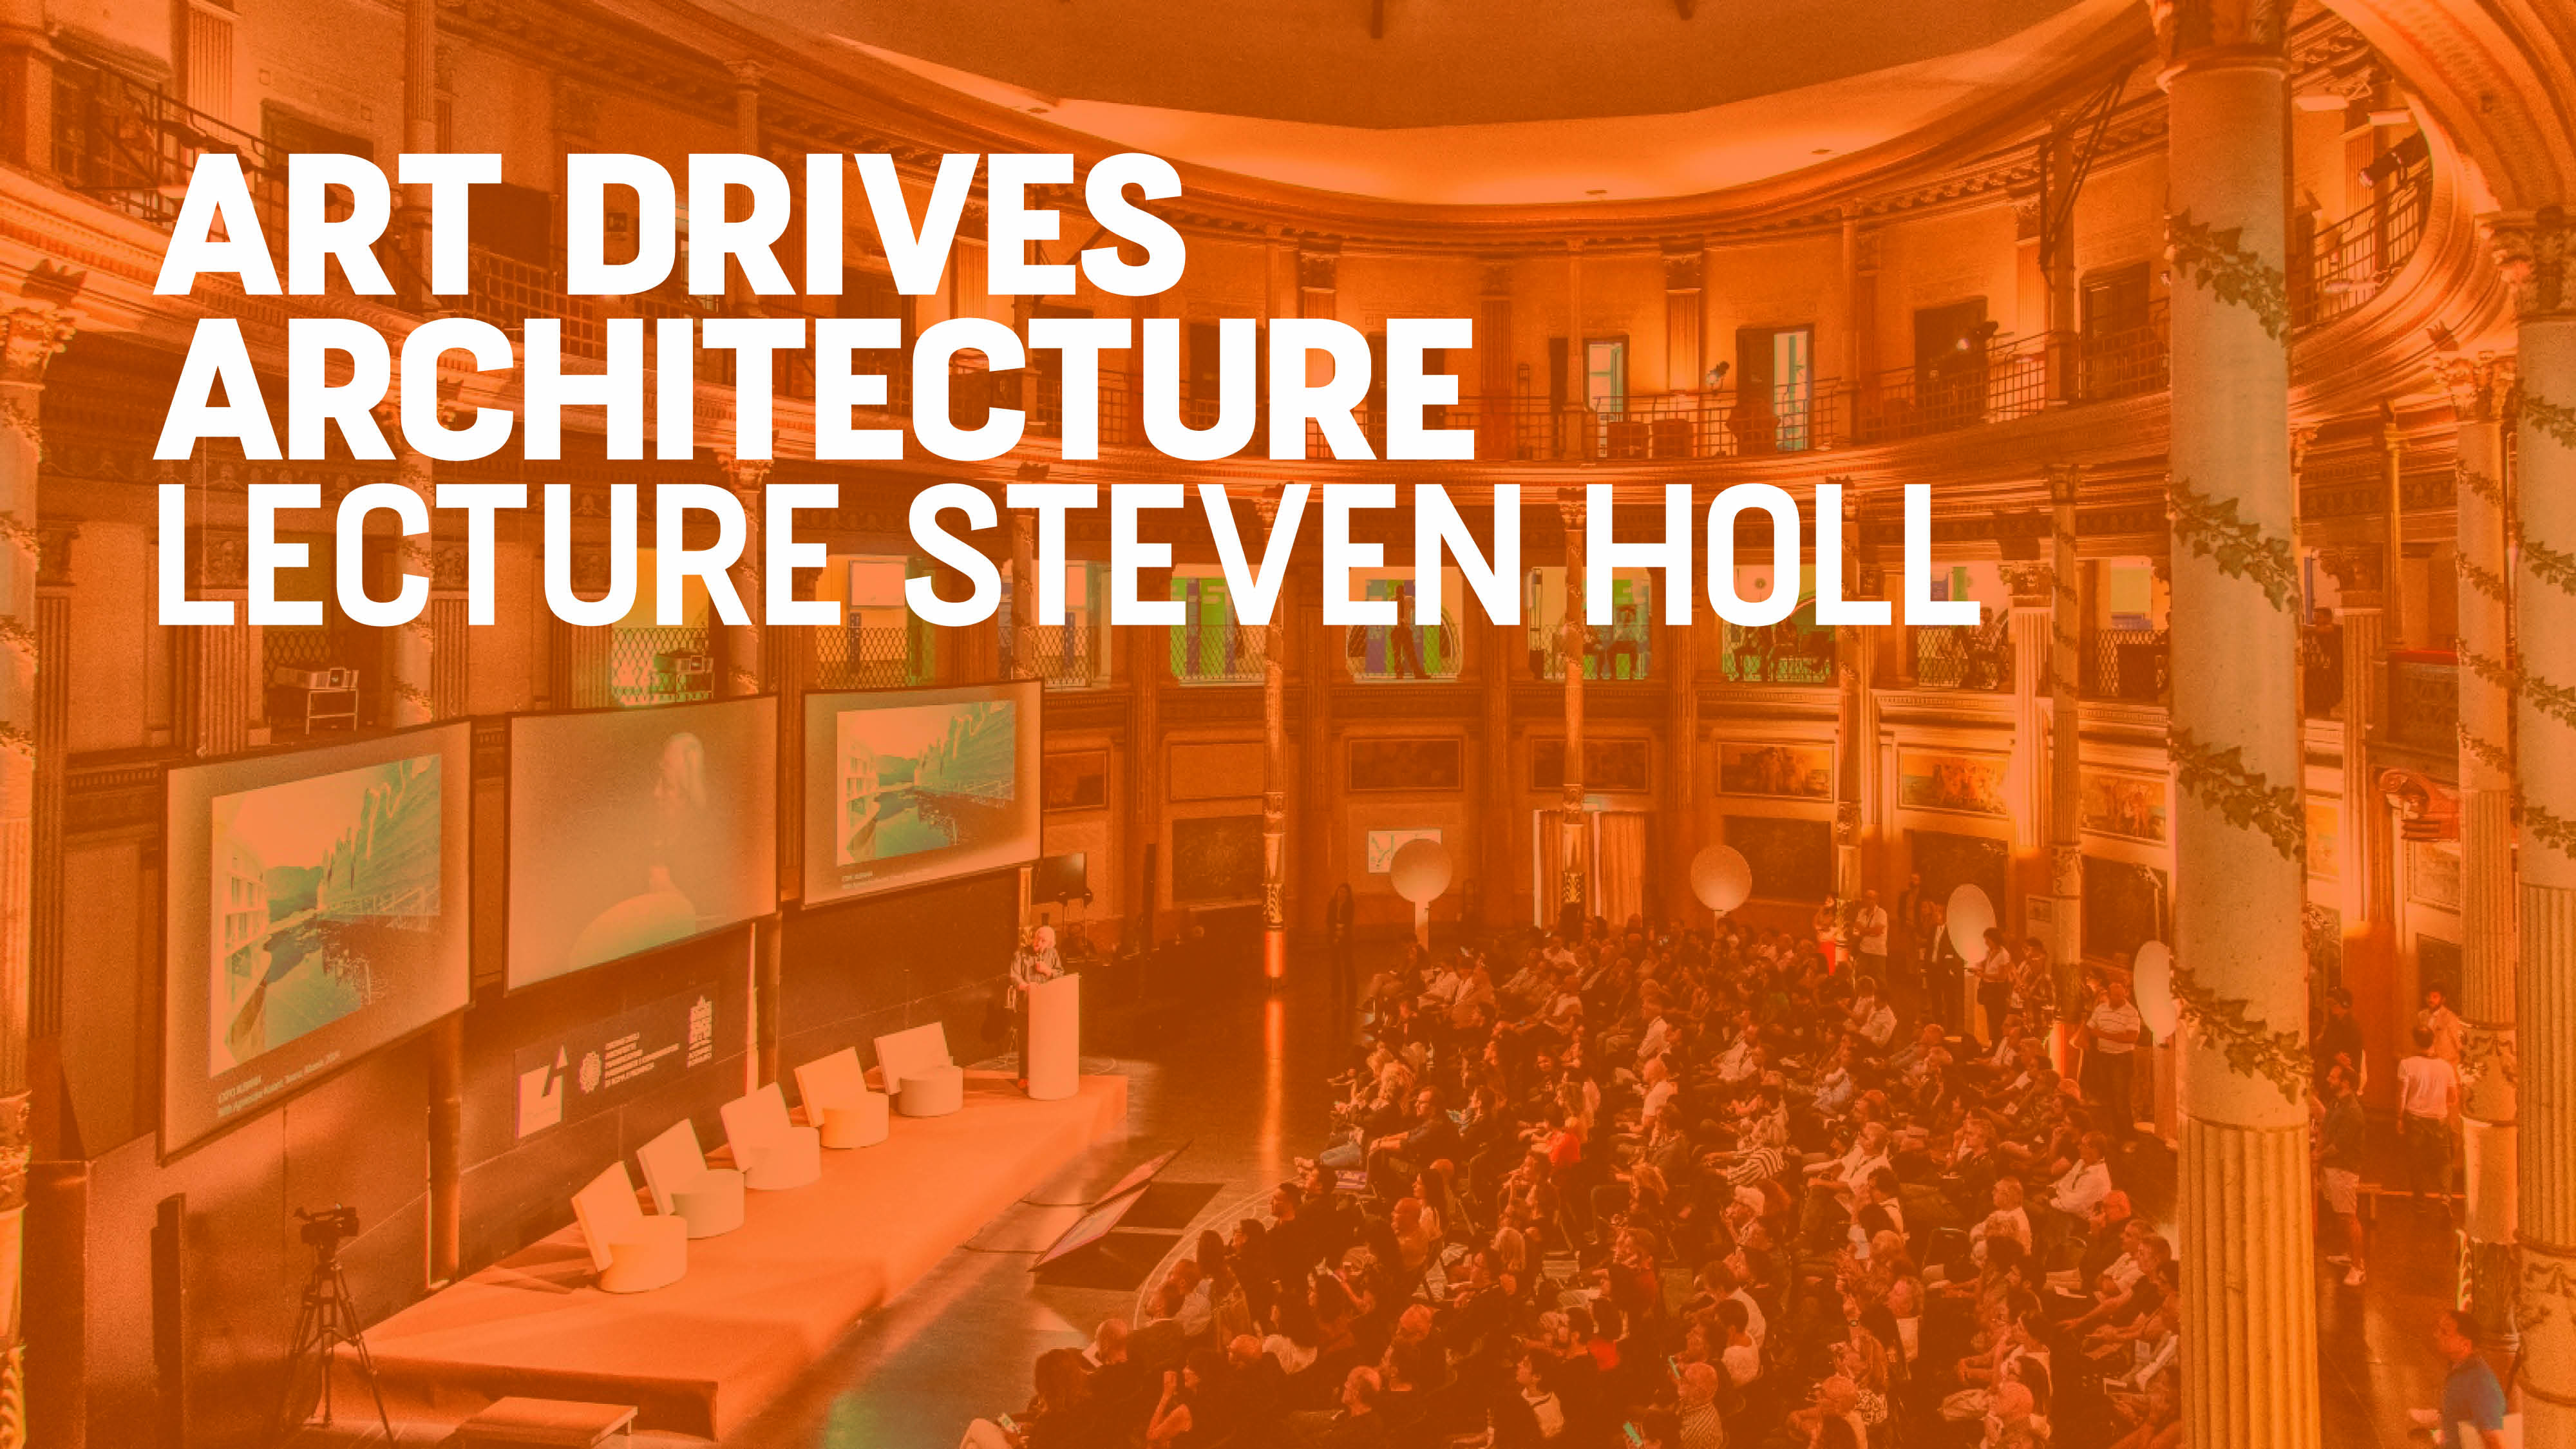 𝐀𝐫𝐭 𝐝𝐫𝐢𝐯𝐞𝐬 𝐚𝐫𝐜𝐡𝐢𝐭𝐞𝐜𝐭𝐮𝐫𝐞 | Lecture Steven Holl